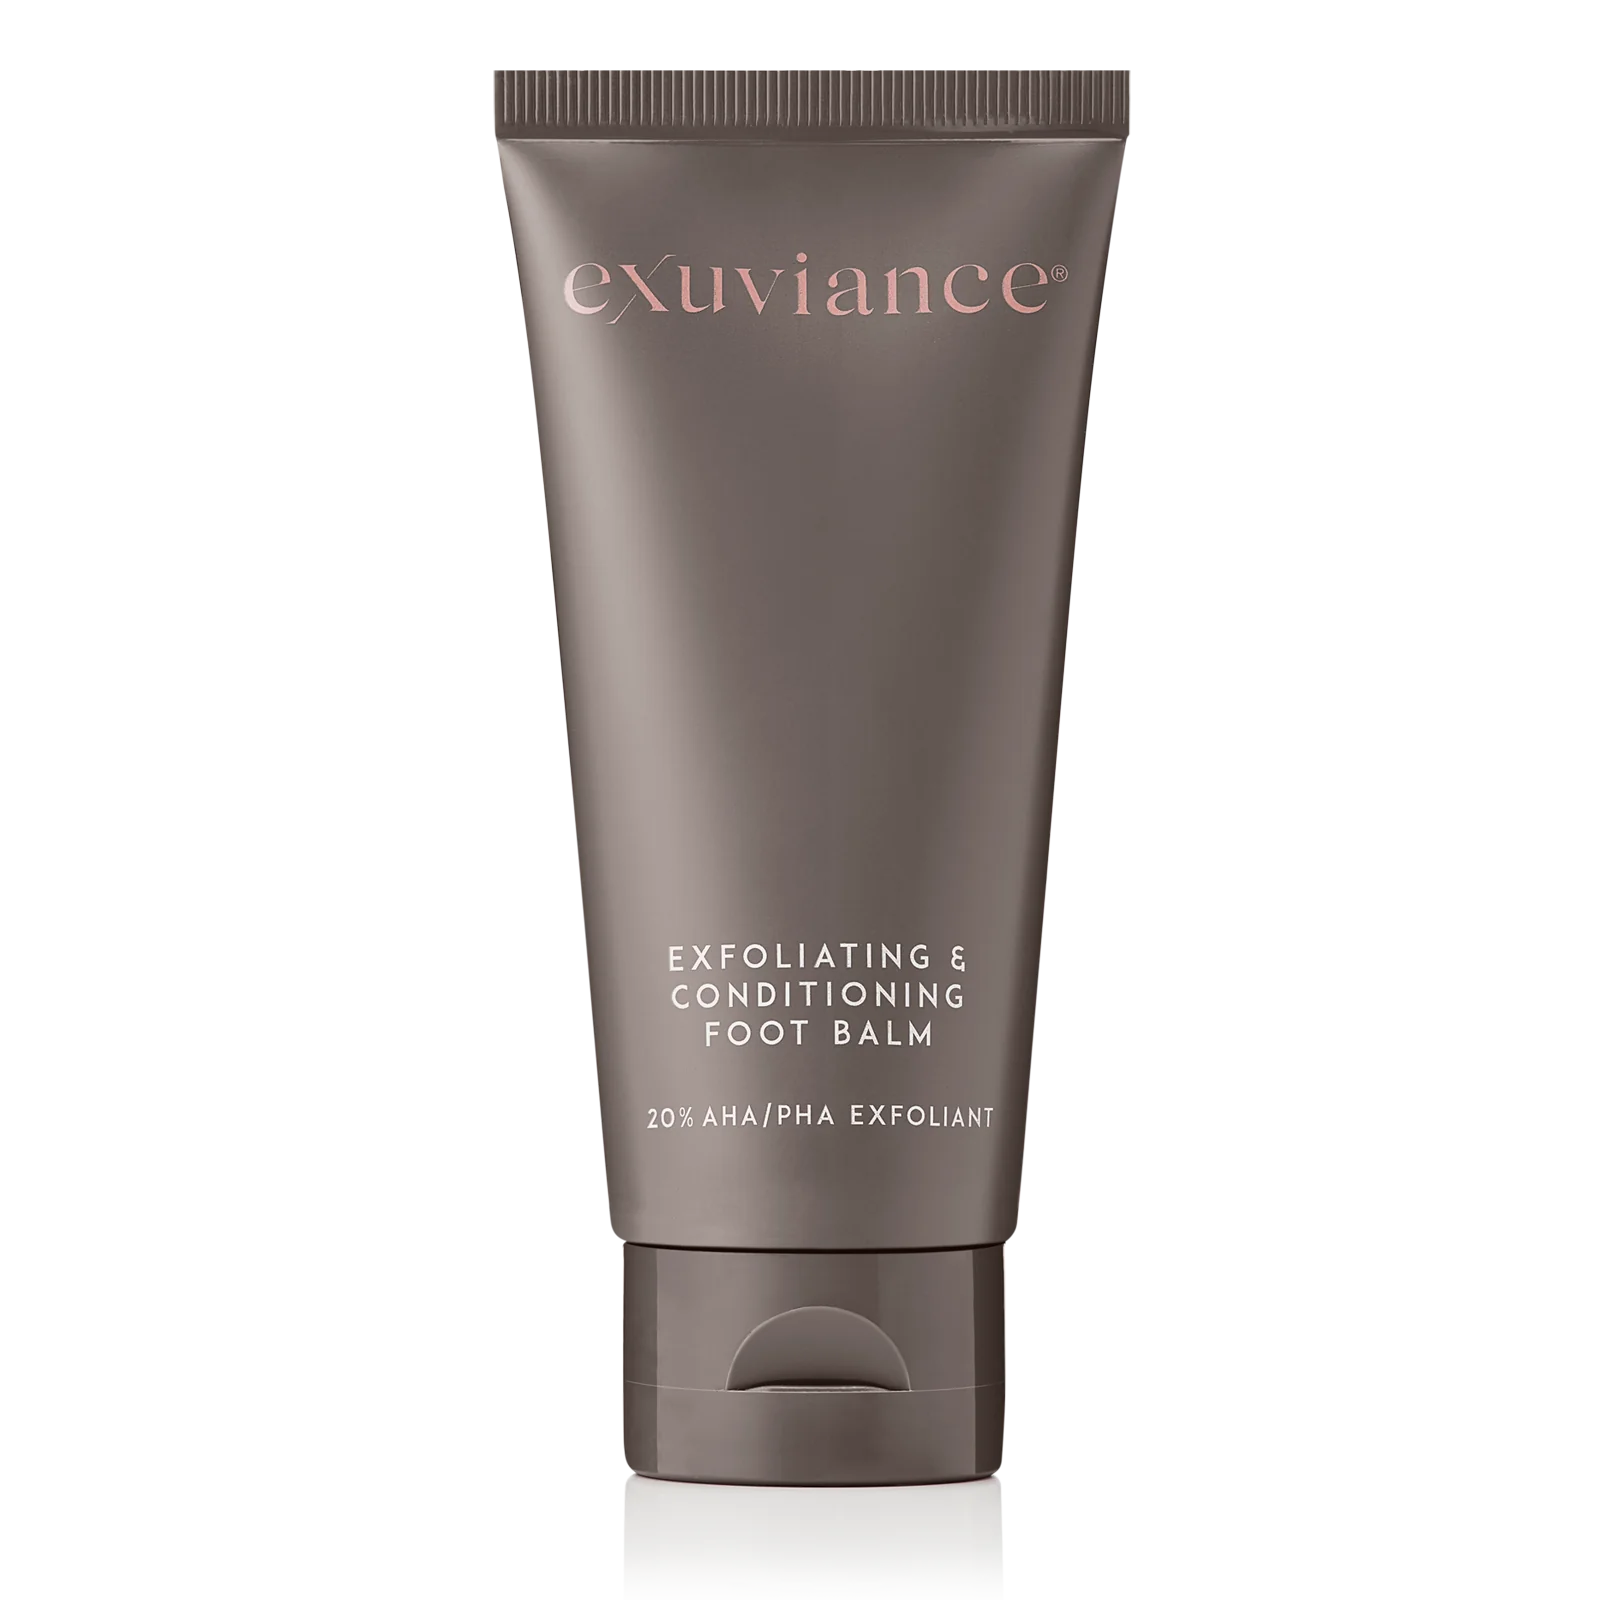 Exuviance | Exfoliating & Conditioning Foot Balm